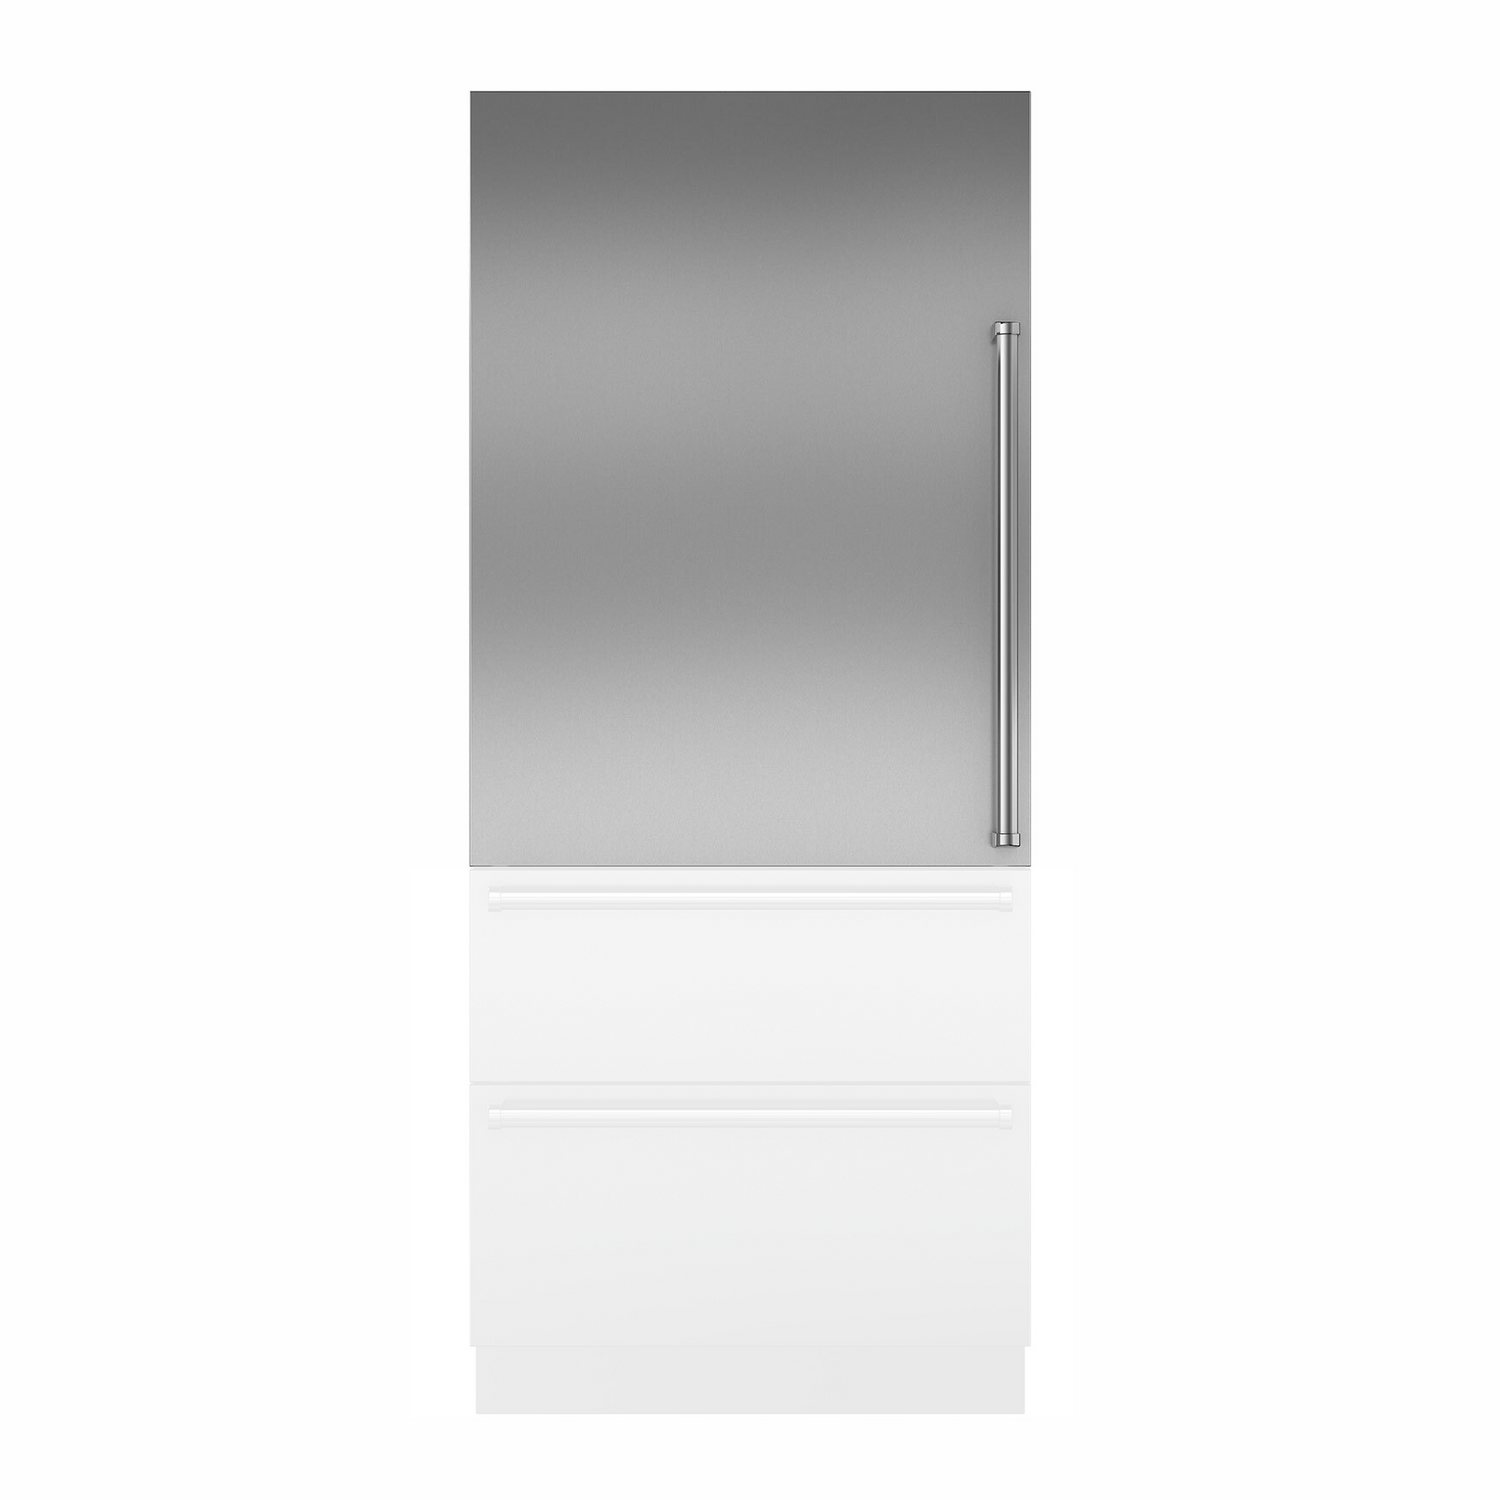 Sub-Zero Stainless Steel Frontal with Pro-Handle - For Combination Tall Refrigerator/Freezer - 914mm